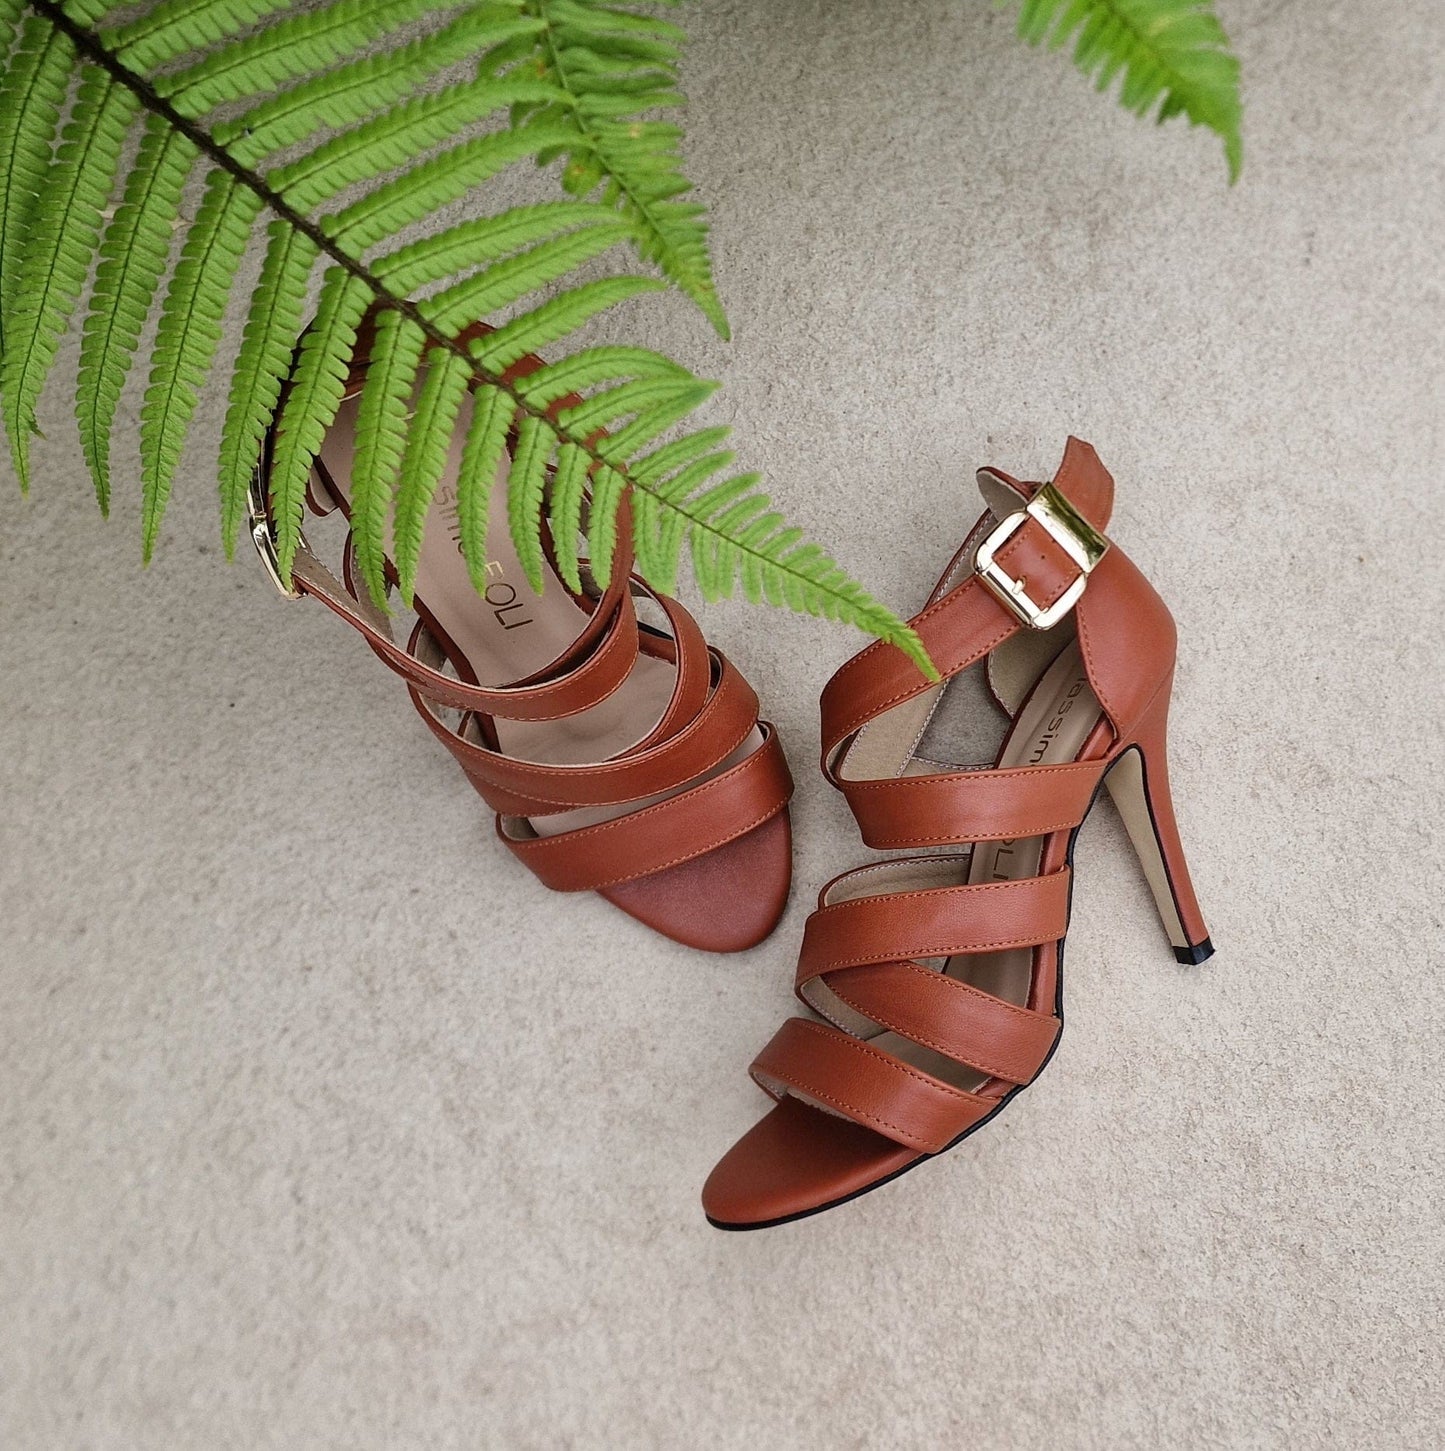 Small size tan leather gladiator heels